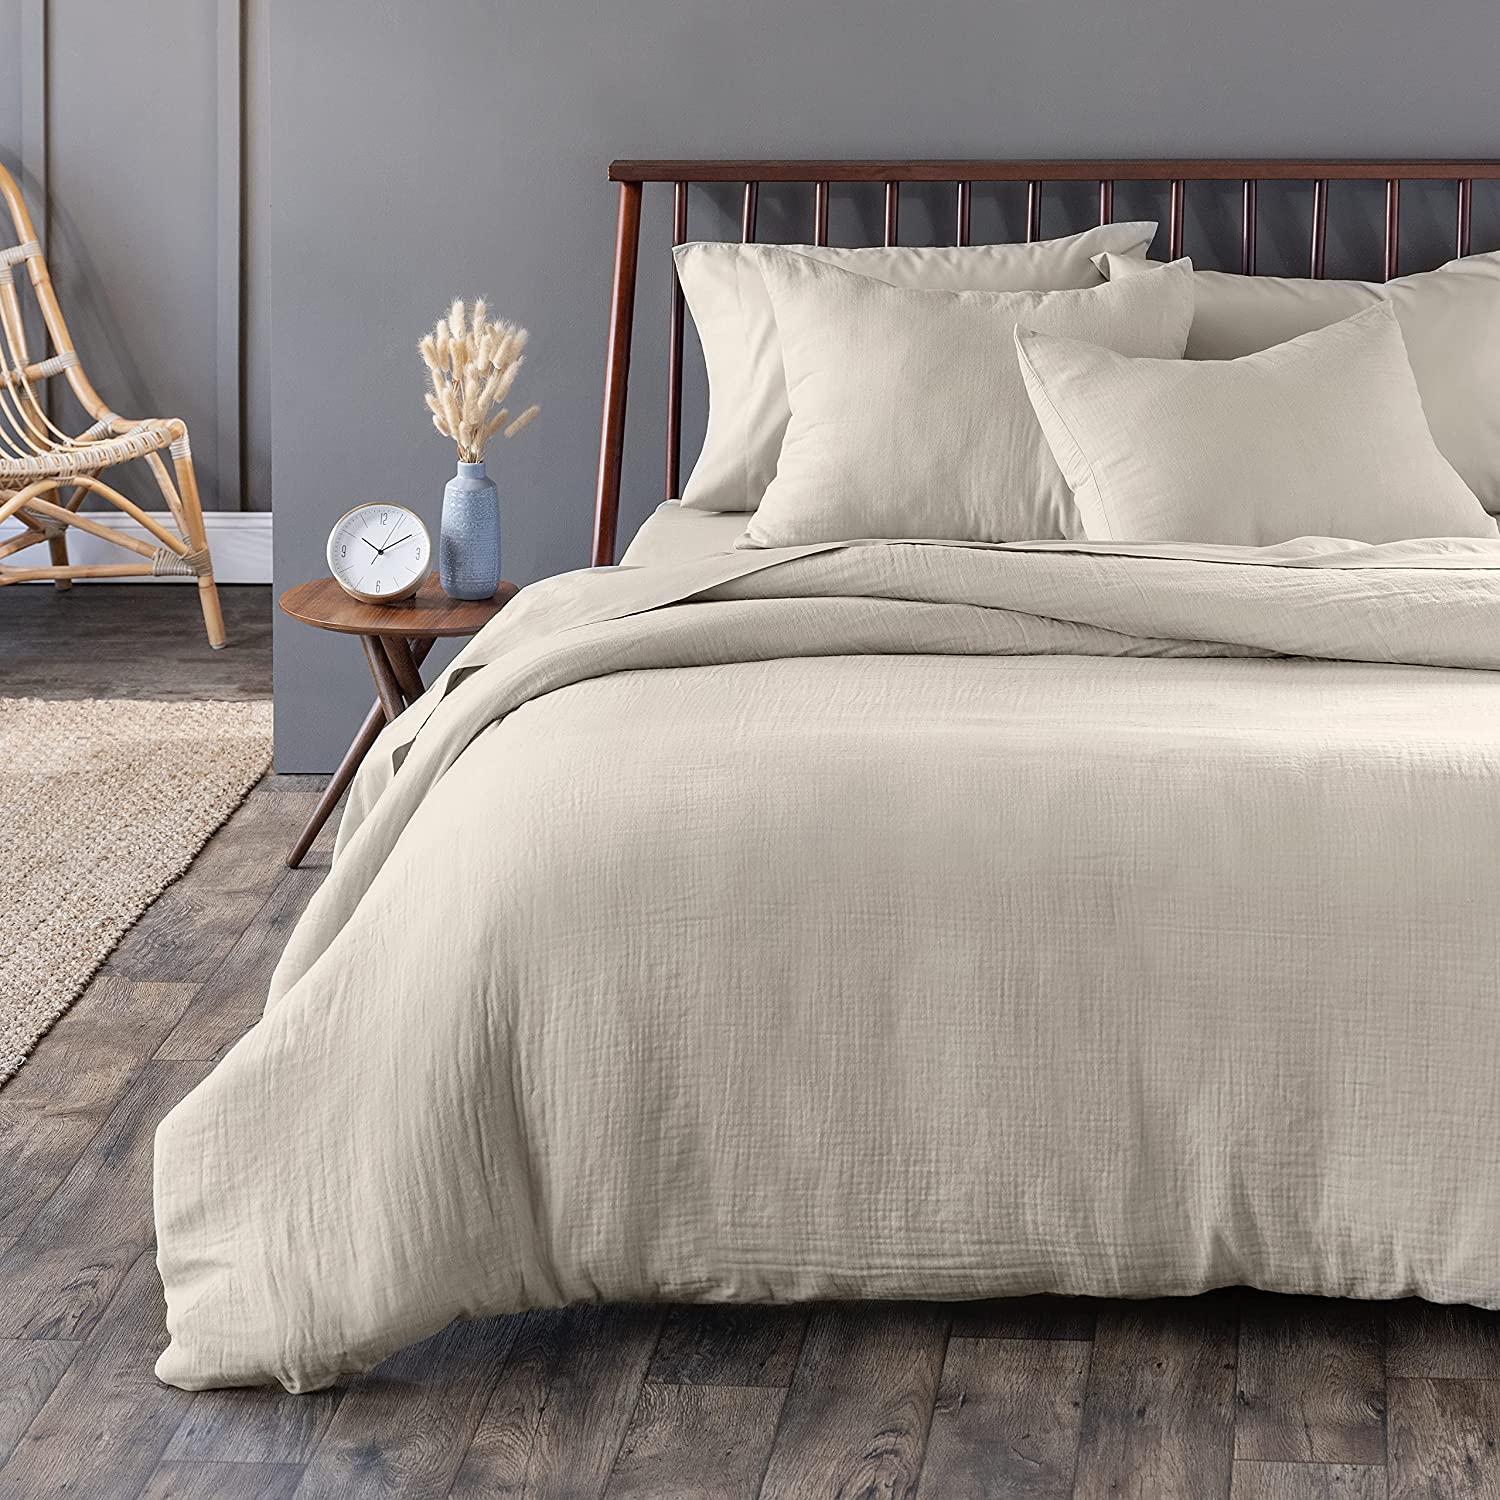 Price:$104.99  Gauze 100% Cotton Duvet Cover Set | King/Cal King Size | Fawn Brown | 108" x 92" | 3 Piece | Supersoft | Lightweight | Breathable | Machine Washable : Home & Kitchen